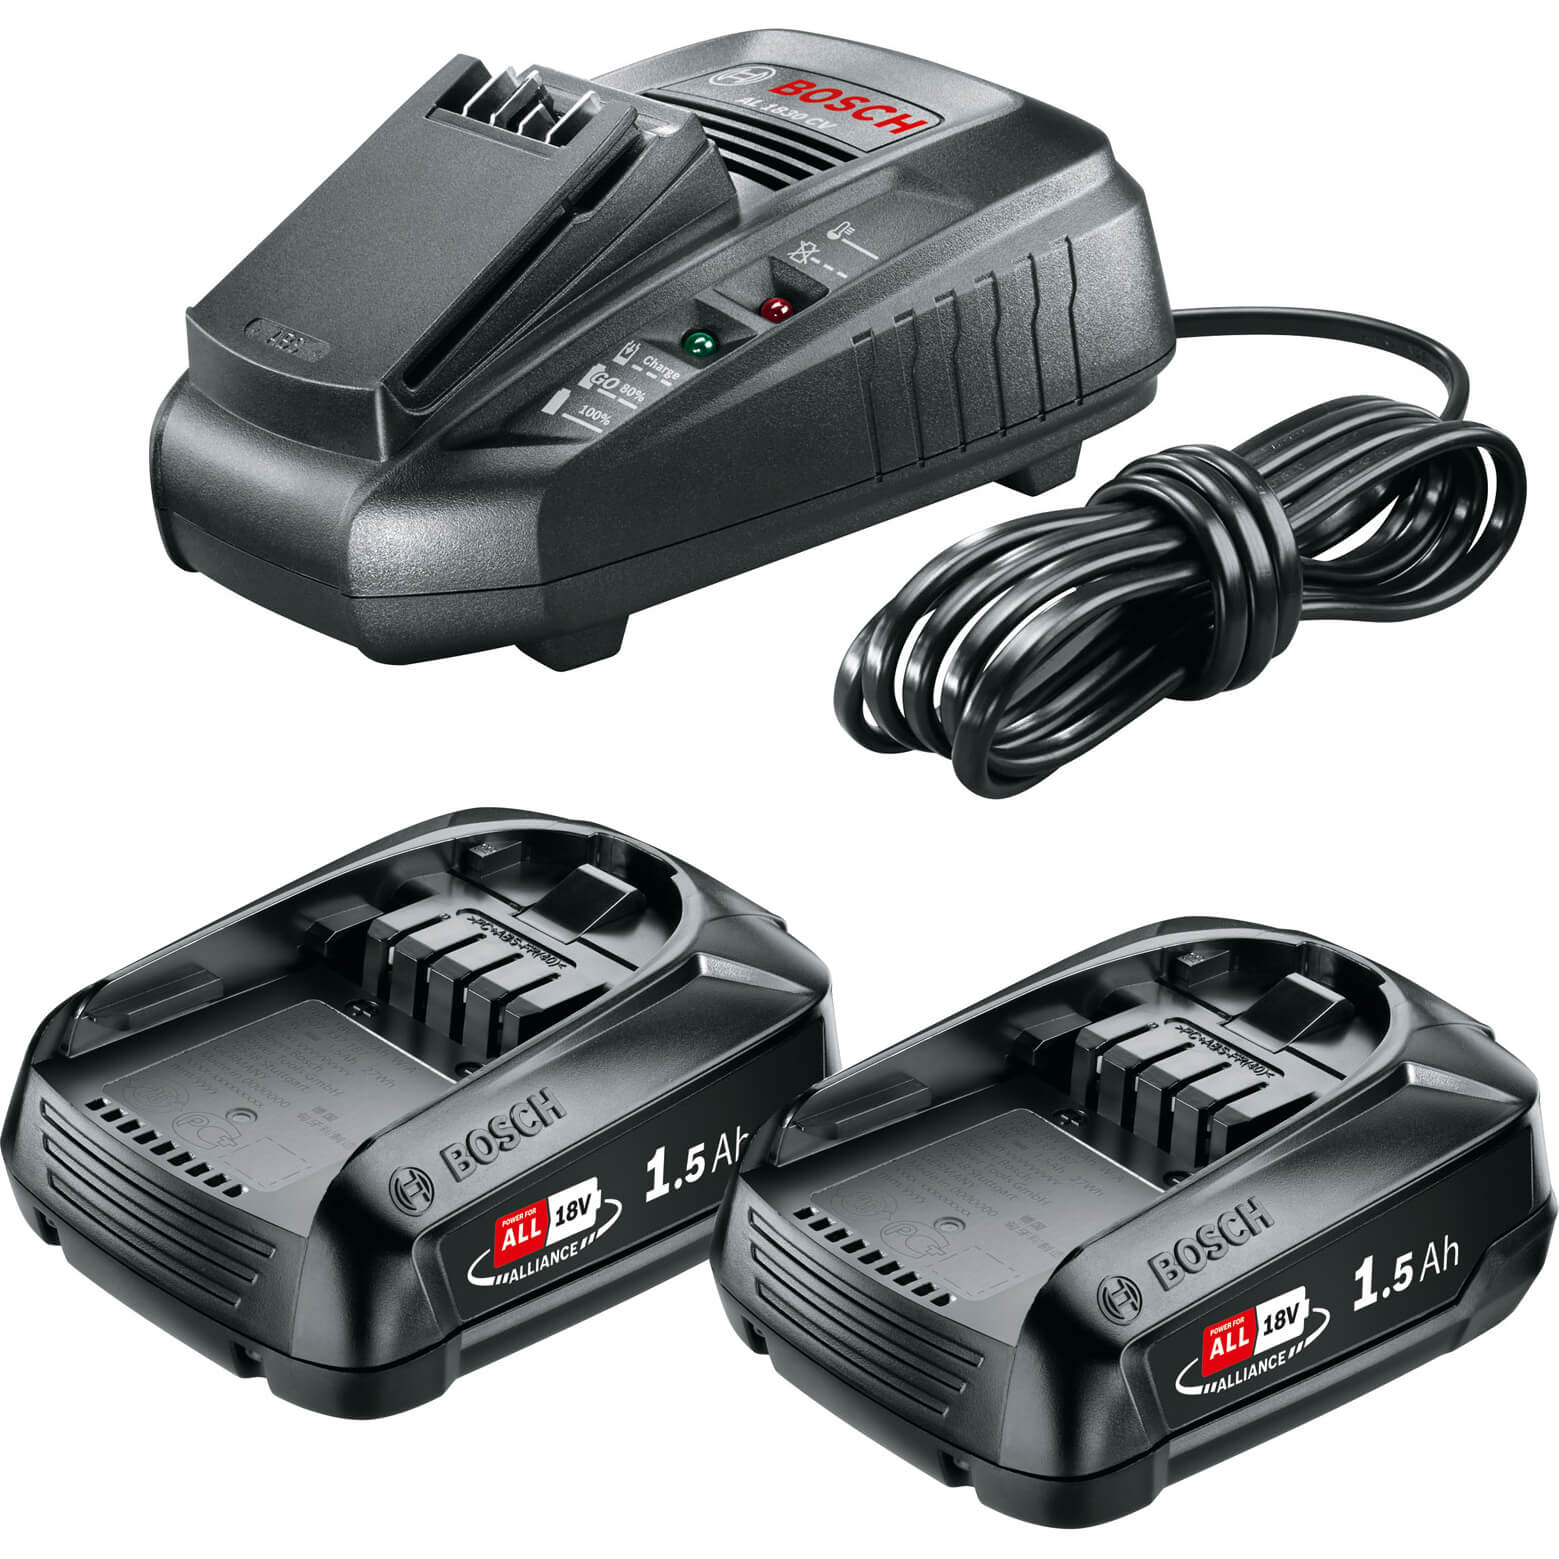 Image of Bosch Genuine GREEN 18v Cordless Li-ion Twin Battery 1.5ah and 3A Fast Charger 1.5ah